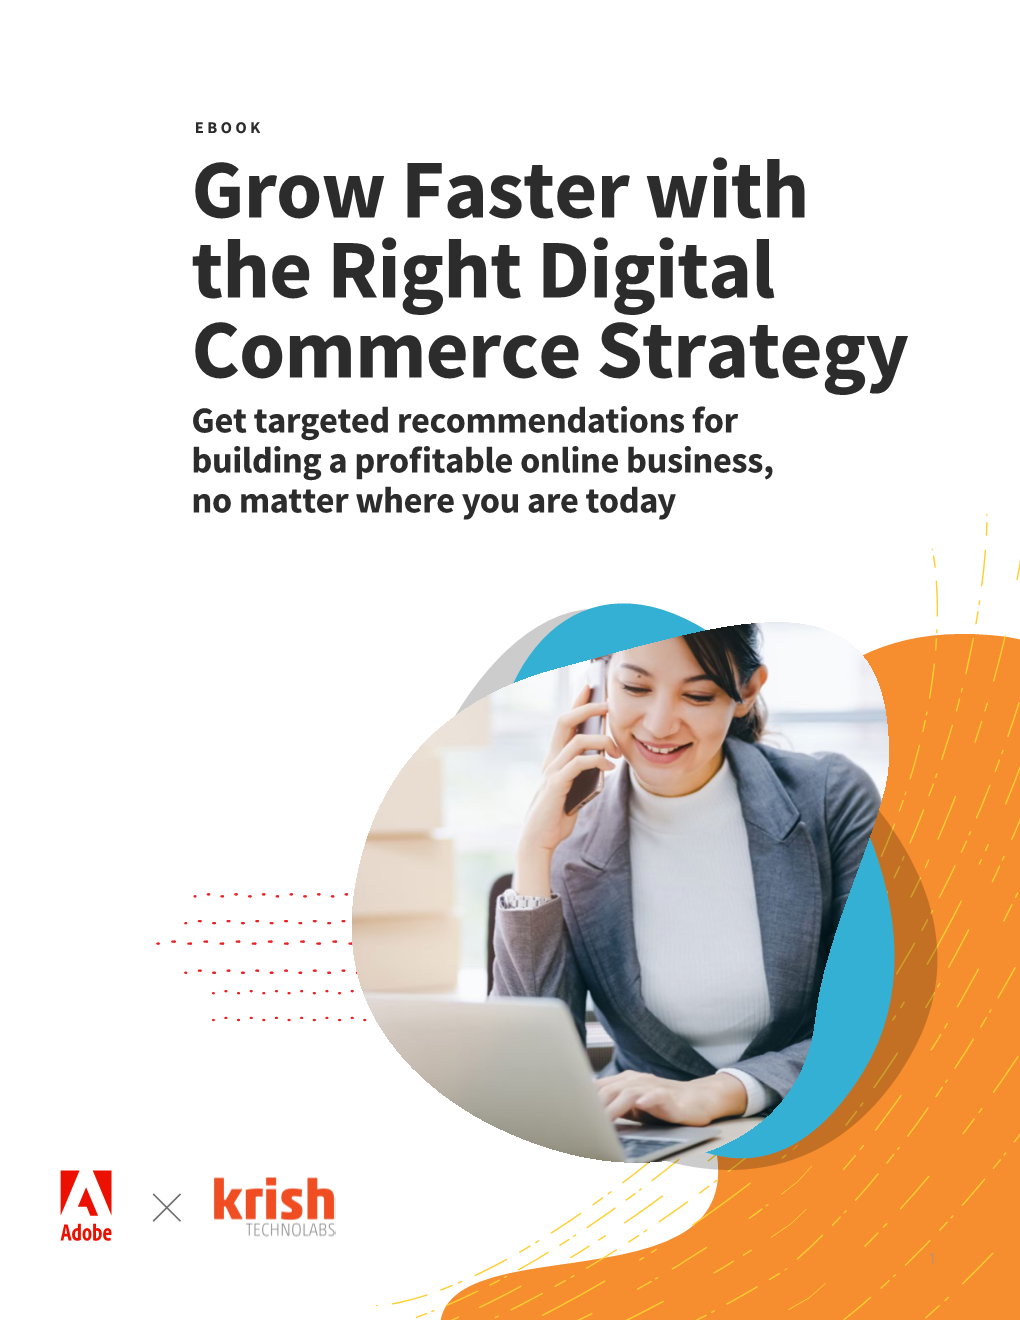 Grow Faster with the Right Digital Commerce Strategy Get Targeted Recommendations for Building a Profitable Online Business, No Matter Where You Are Today